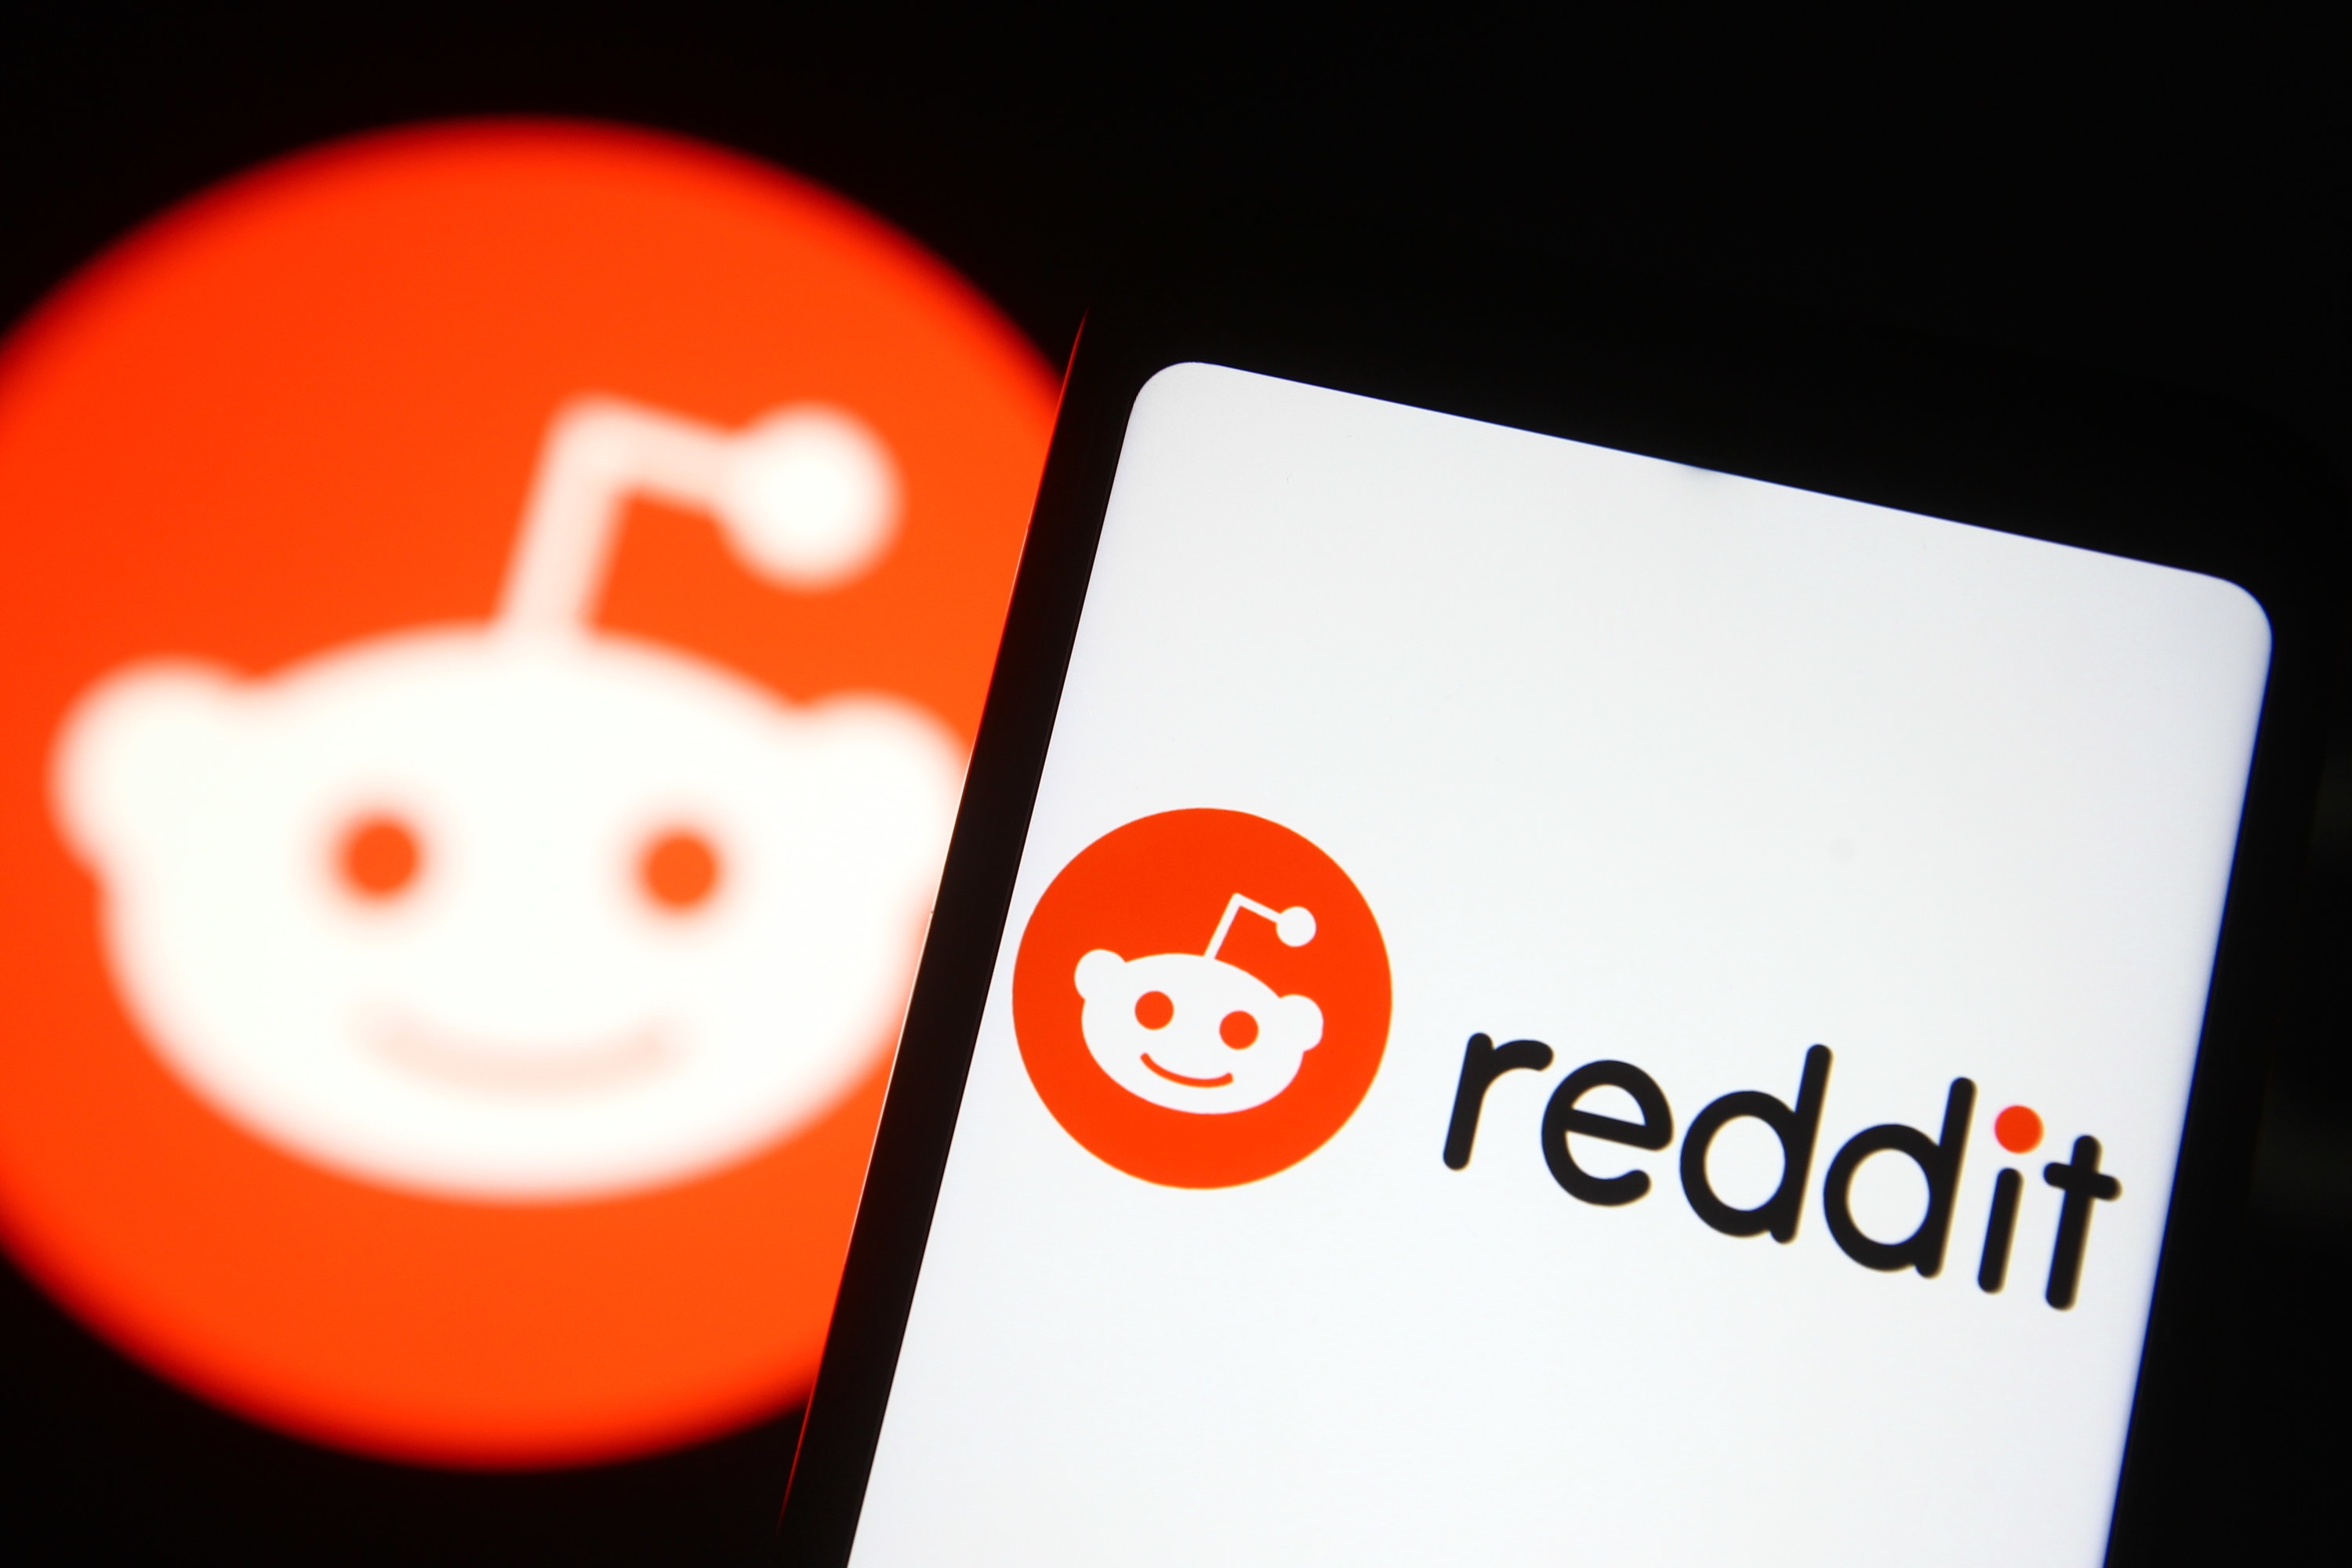 A smartphone with the Reddit app loading, showing the logo